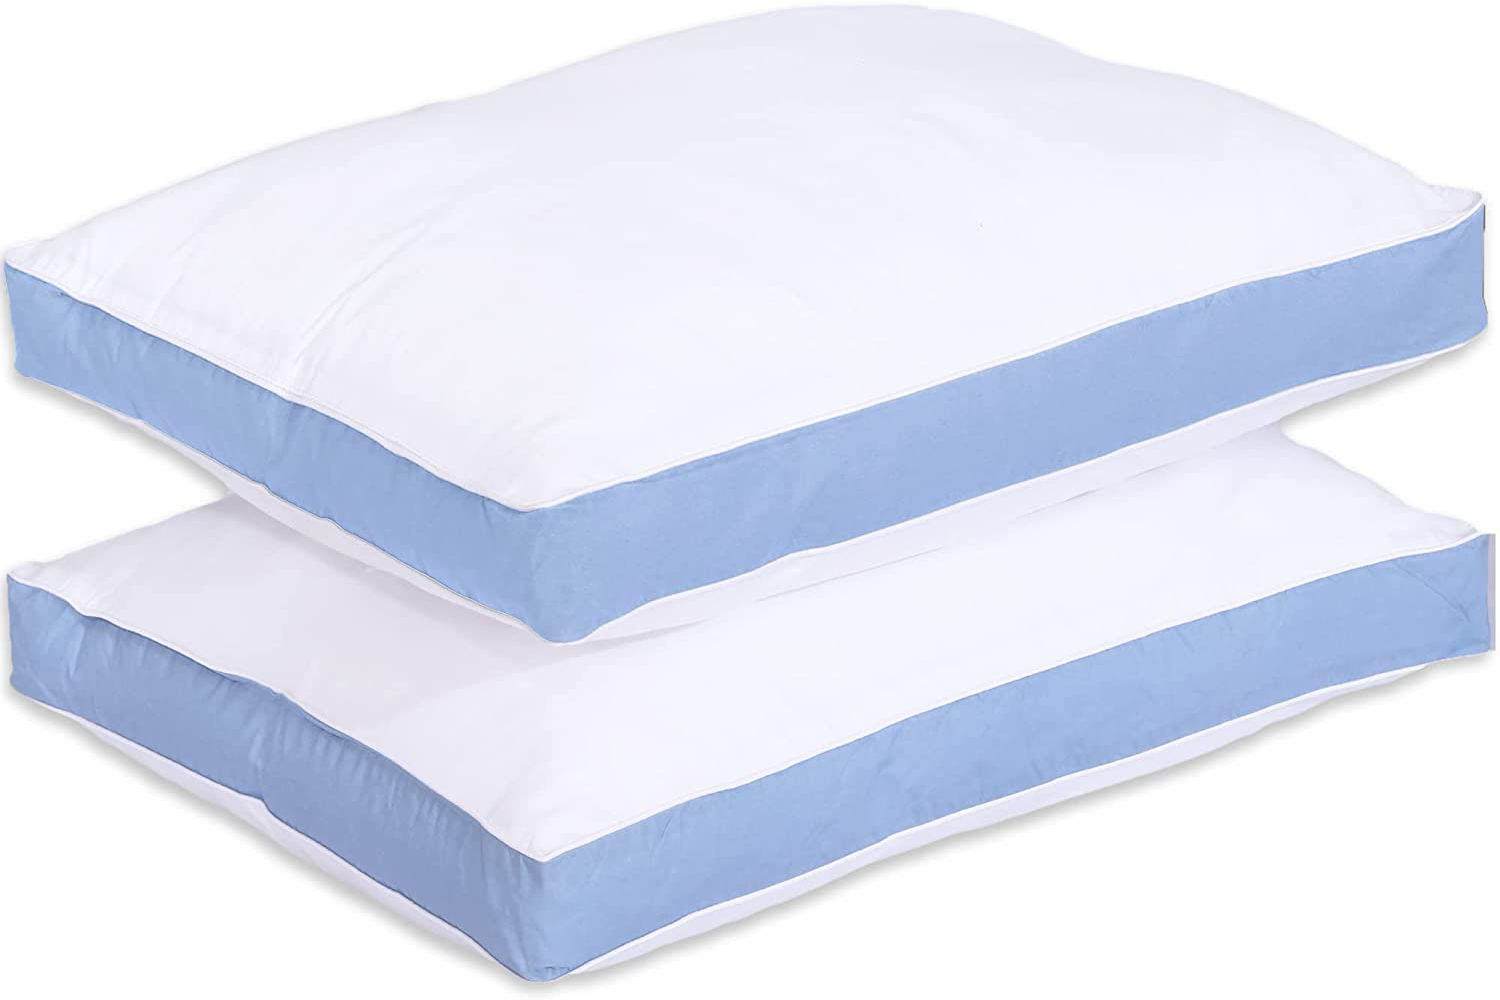 Utopia Bedding Gusseted Pillow (2-Pack) Premium Quality Bed Pillows - Side Back Sleepers - Blue Gusset - King - 18 x 36 Inches